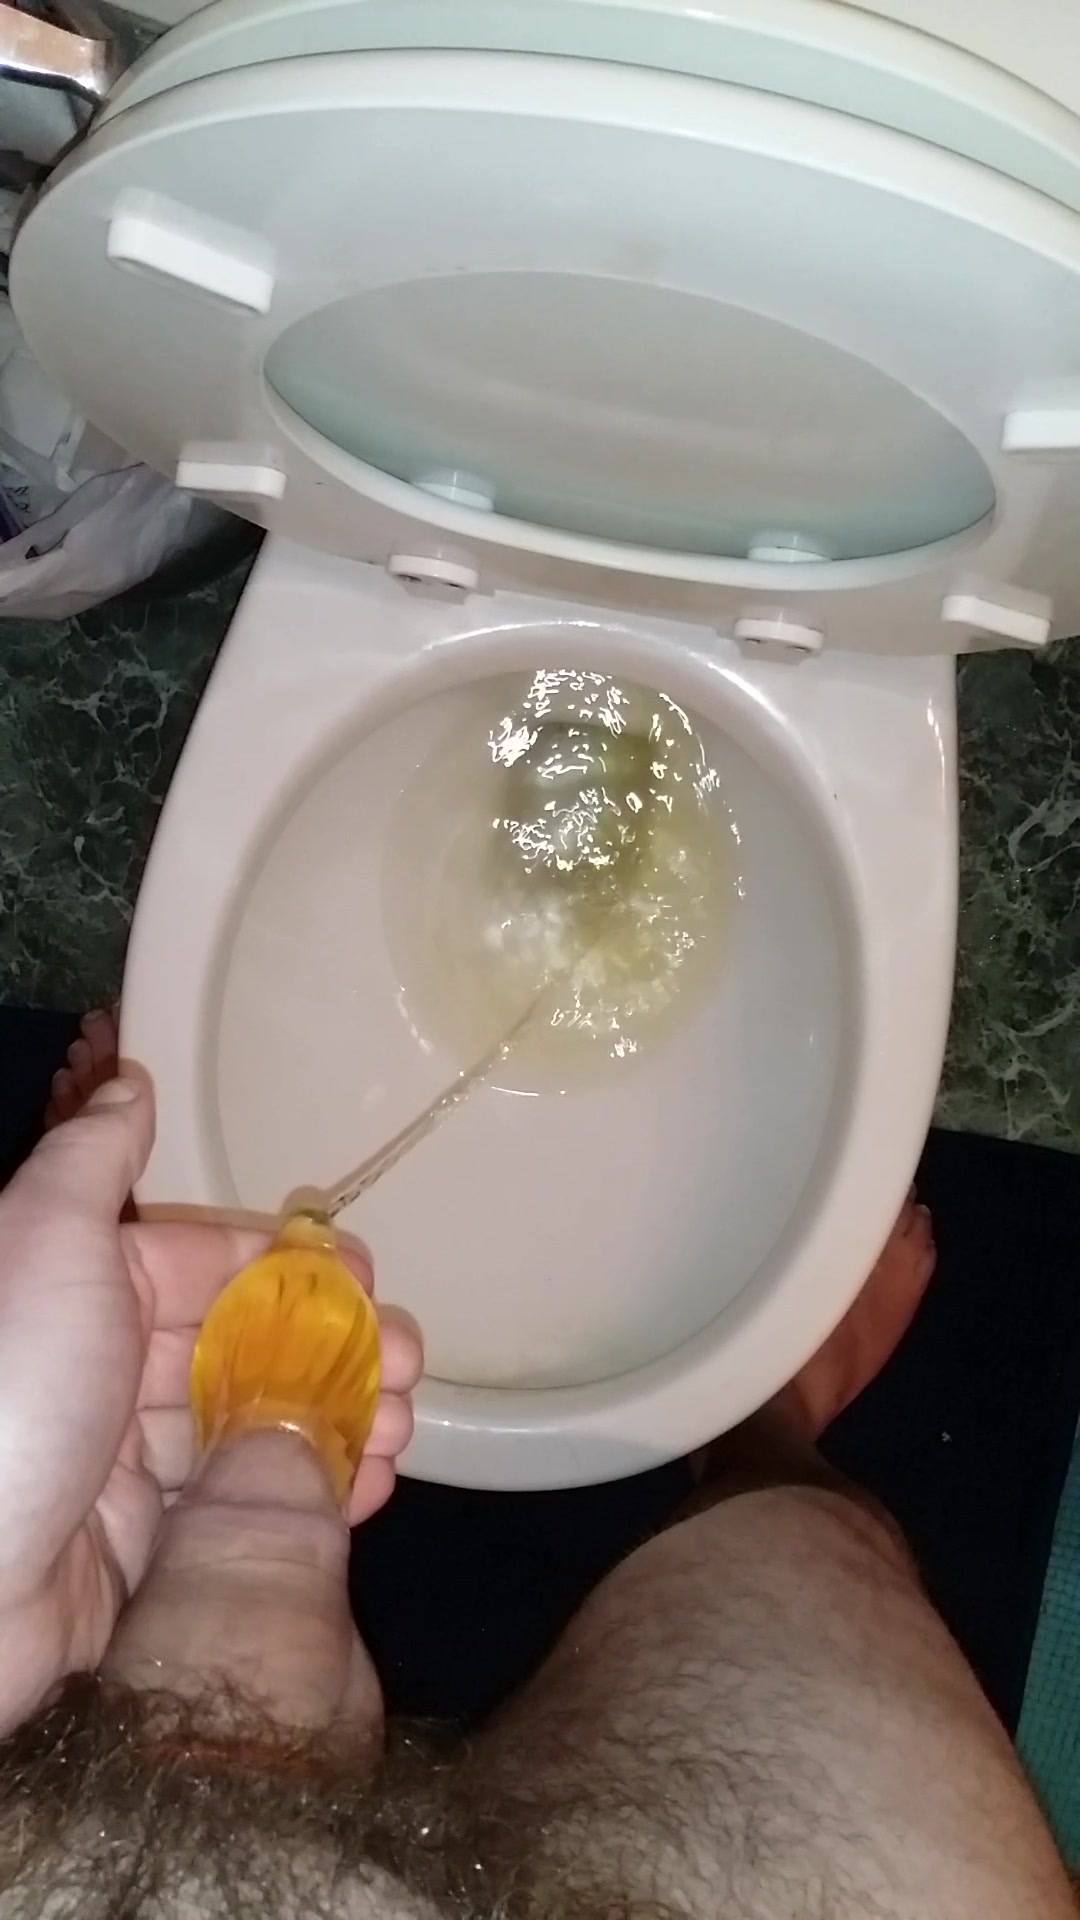 Emptying A Piss Filled Condom